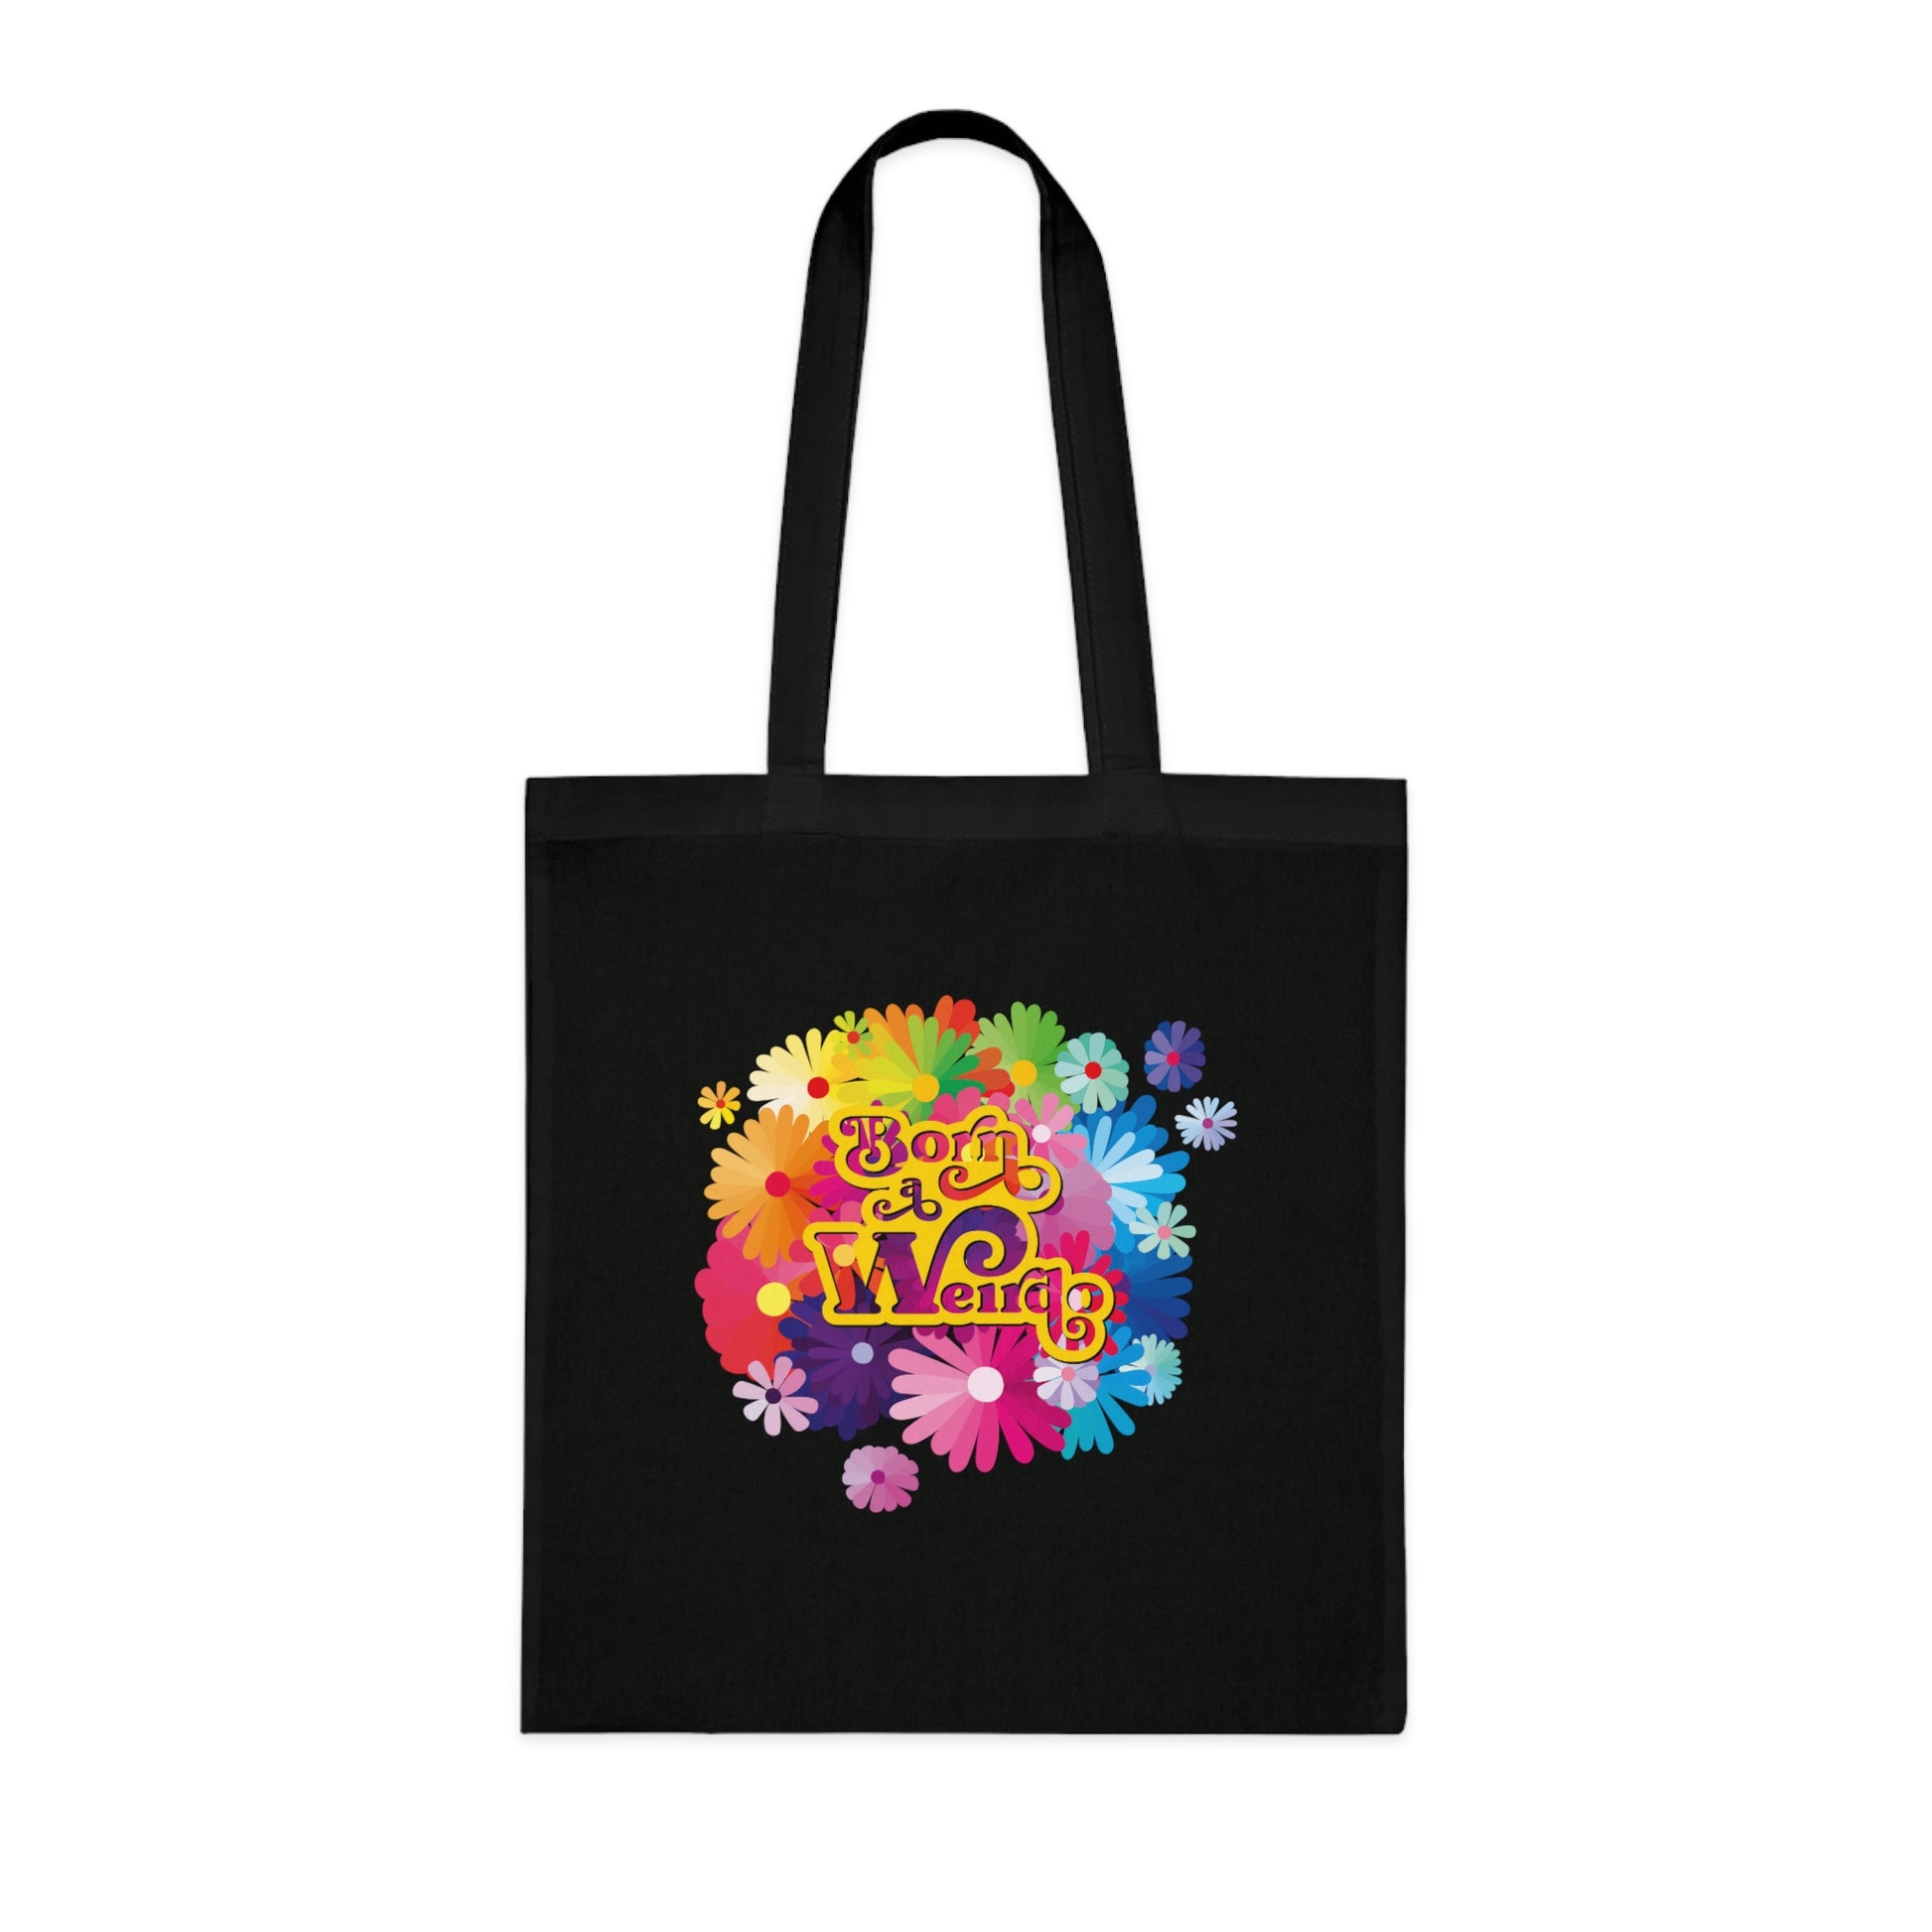 Weirdo | Colorful flowers are contrasting with the black color of the cotton tote bag. In the middle of the flowers is a funny meme, Born a Weirdo.